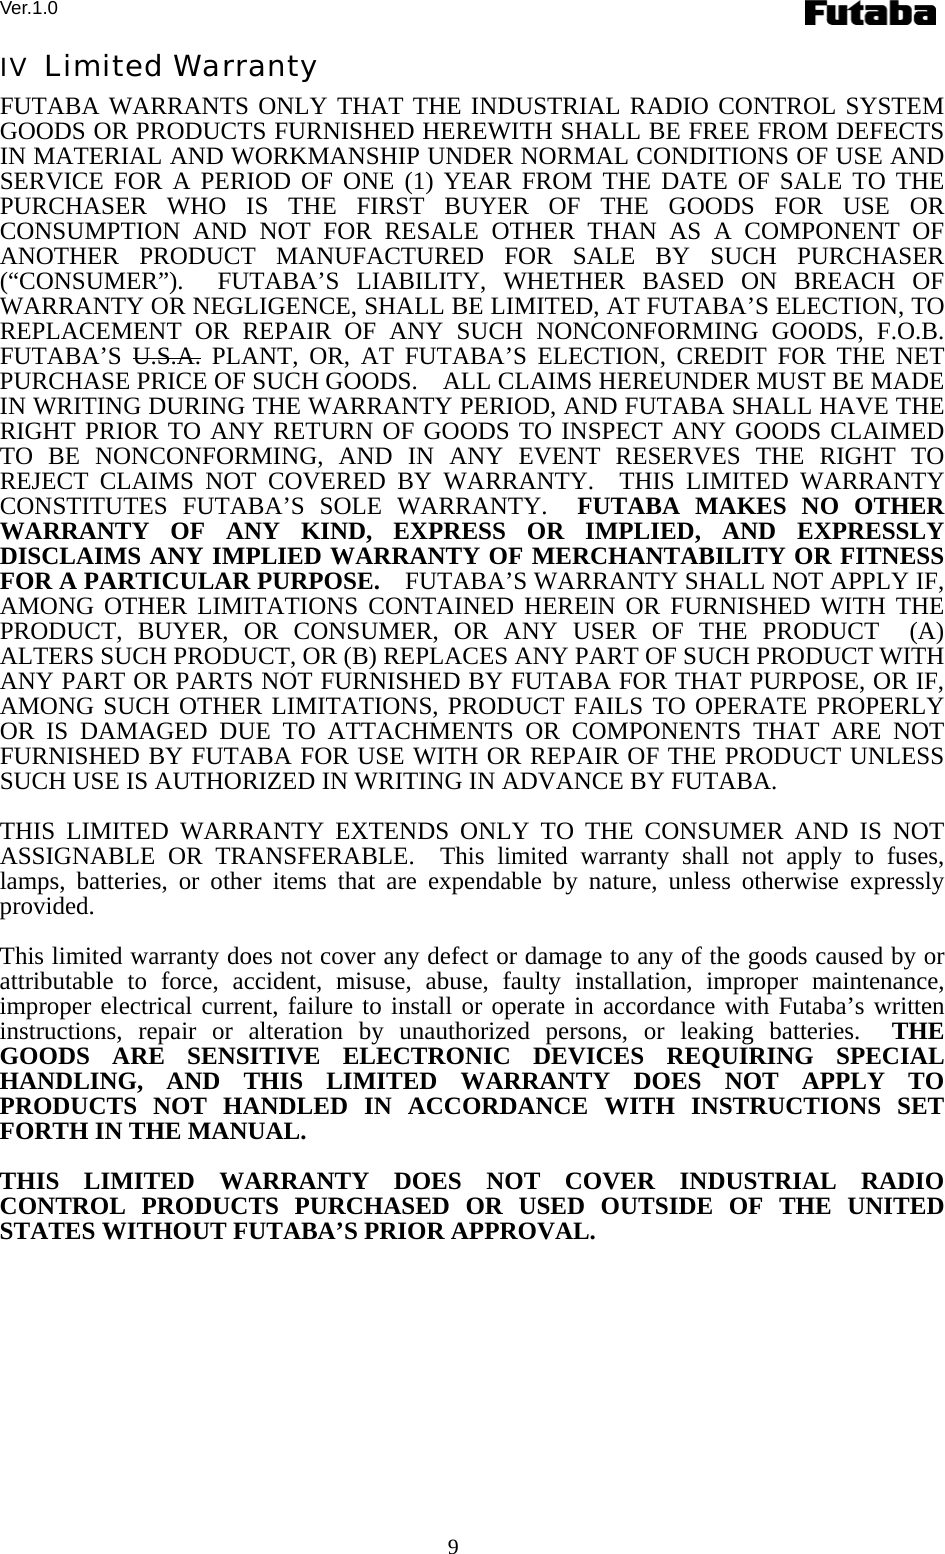 Ver.1.0 9 IV  Limited Warranty FUTABA WARRANTS ONLY THAT THE INDUSTRIAL RADIO CONTROL SYSTEM GOODS OR PRODUCTS FURNISHED HEREWITH SHALL BE FREE FROM DEFECTS IN MATERIAL AND WORKMANSHIP UNDER NORMAL CONDITIONS OF USE AND SERVICE FOR A PERIOD OF ONE (1) YEAR FROM THE DATE OF SALE TO THE PURCHASER WHO IS THE FIRST BUYER OF THE GOODS FOR USE OR CONSUMPTION AND NOT FOR RESALE OTHER THAN AS A COMPONENT OF ANOTHER PRODUCT MANUFACTURED FOR SALE BY SUCH PURCHASER (“CONSUMER”).  FUTABA’S LIABILITY, WHETHER BASED ON BREACH OF WARRANTY OR NEGLIGENCE, SHALL BE LIMITED, AT FUTABA’S ELECTION, TO REPLACEMENT OR REPAIR OF ANY SUCH NONCONFORMING GOODS, F.O.B. FUTABA’S U.S.A. PLANT, OR, AT FUTABA’S ELECTION, CREDIT FOR THE NET PURCHASE PRICE OF SUCH GOODS.    ALL CLAIMS HEREUNDER MUST BE MADE IN WRITING DURING THE WARRANTY PERIOD, AND FUTABA SHALL HAVE THE RIGHT PRIOR TO ANY RETURN OF GOODS TO INSPECT ANY GOODS CLAIMED TO BE NONCONFORMING, AND IN ANY EVENT RESERVES THE RIGHT TO REJECT CLAIMS NOT COVERED BY WARRANTY.  THIS LIMITED WARRANTY CONSTITUTES FUTABA’S SOLE WARRANTY.  FUTABA MAKES NO OTHER WARRANTY OF ANY KIND, EXPRESS OR IMPLIED, AND EXPRESSLY DISCLAIMS ANY IMPLIED WARRANTY OF MERCHANTABILITY OR FITNESS FOR A PARTICULAR PURPOSE.    FUTABA’S WARRANTY SHALL NOT APPLY IF, AMONG OTHER LIMITATIONS CONTAINED HEREIN OR FURNISHED WITH THE PRODUCT, BUYER, OR CONSUMER, OR ANY USER OF THE PRODUCT  (A) ALTERS SUCH PRODUCT, OR (B) REPLACES ANY PART OF SUCH PRODUCT WITH ANY PART OR PARTS NOT FURNISHED BY FUTABA FOR THAT PURPOSE, OR IF, AMONG SUCH OTHER LIMITATIONS, PRODUCT FAILS TO OPERATE PROPERLY OR IS DAMAGED DUE TO ATTACHMENTS OR COMPONENTS THAT ARE NOT FURNISHED BY FUTABA FOR USE WITH OR REPAIR OF THE PRODUCT UNLESS SUCH USE IS AUTHORIZED IN WRITING IN ADVANCE BY FUTABA.  THIS LIMITED WARRANTY EXTENDS ONLY TO THE CONSUMER AND IS NOT ASSIGNABLE OR TRANSFERABLE.  This limited warranty shall not apply to fuses, lamps, batteries, or other items that are expendable by nature, unless otherwise expressly provided.  This limited warranty does not cover any defect or damage to any of the goods caused by or attributable to force, accident, misuse, abuse, faulty installation, improper maintenance, improper electrical current, failure to install or operate in accordance with Futaba’s written instructions, repair or alteration by unauthorized persons, or leaking batteries.  THE GOODS ARE SENSITIVE ELECTRONIC DEVICES REQUIRING SPECIAL HANDLING, AND THIS LIMITED WARRANTY DOES NOT APPLY TO PRODUCTS NOT HANDLED IN ACCORDANCE WITH INSTRUCTIONS SET FORTH IN THE MANUAL.  THIS LIMITED WARRANTY DOES NOT COVER INDUSTRIAL RADIO CONTROL PRODUCTS PURCHASED OR USED OUTSIDE OF THE UNITED STATES WITHOUT FUTABA’S PRIOR APPROVAL.  